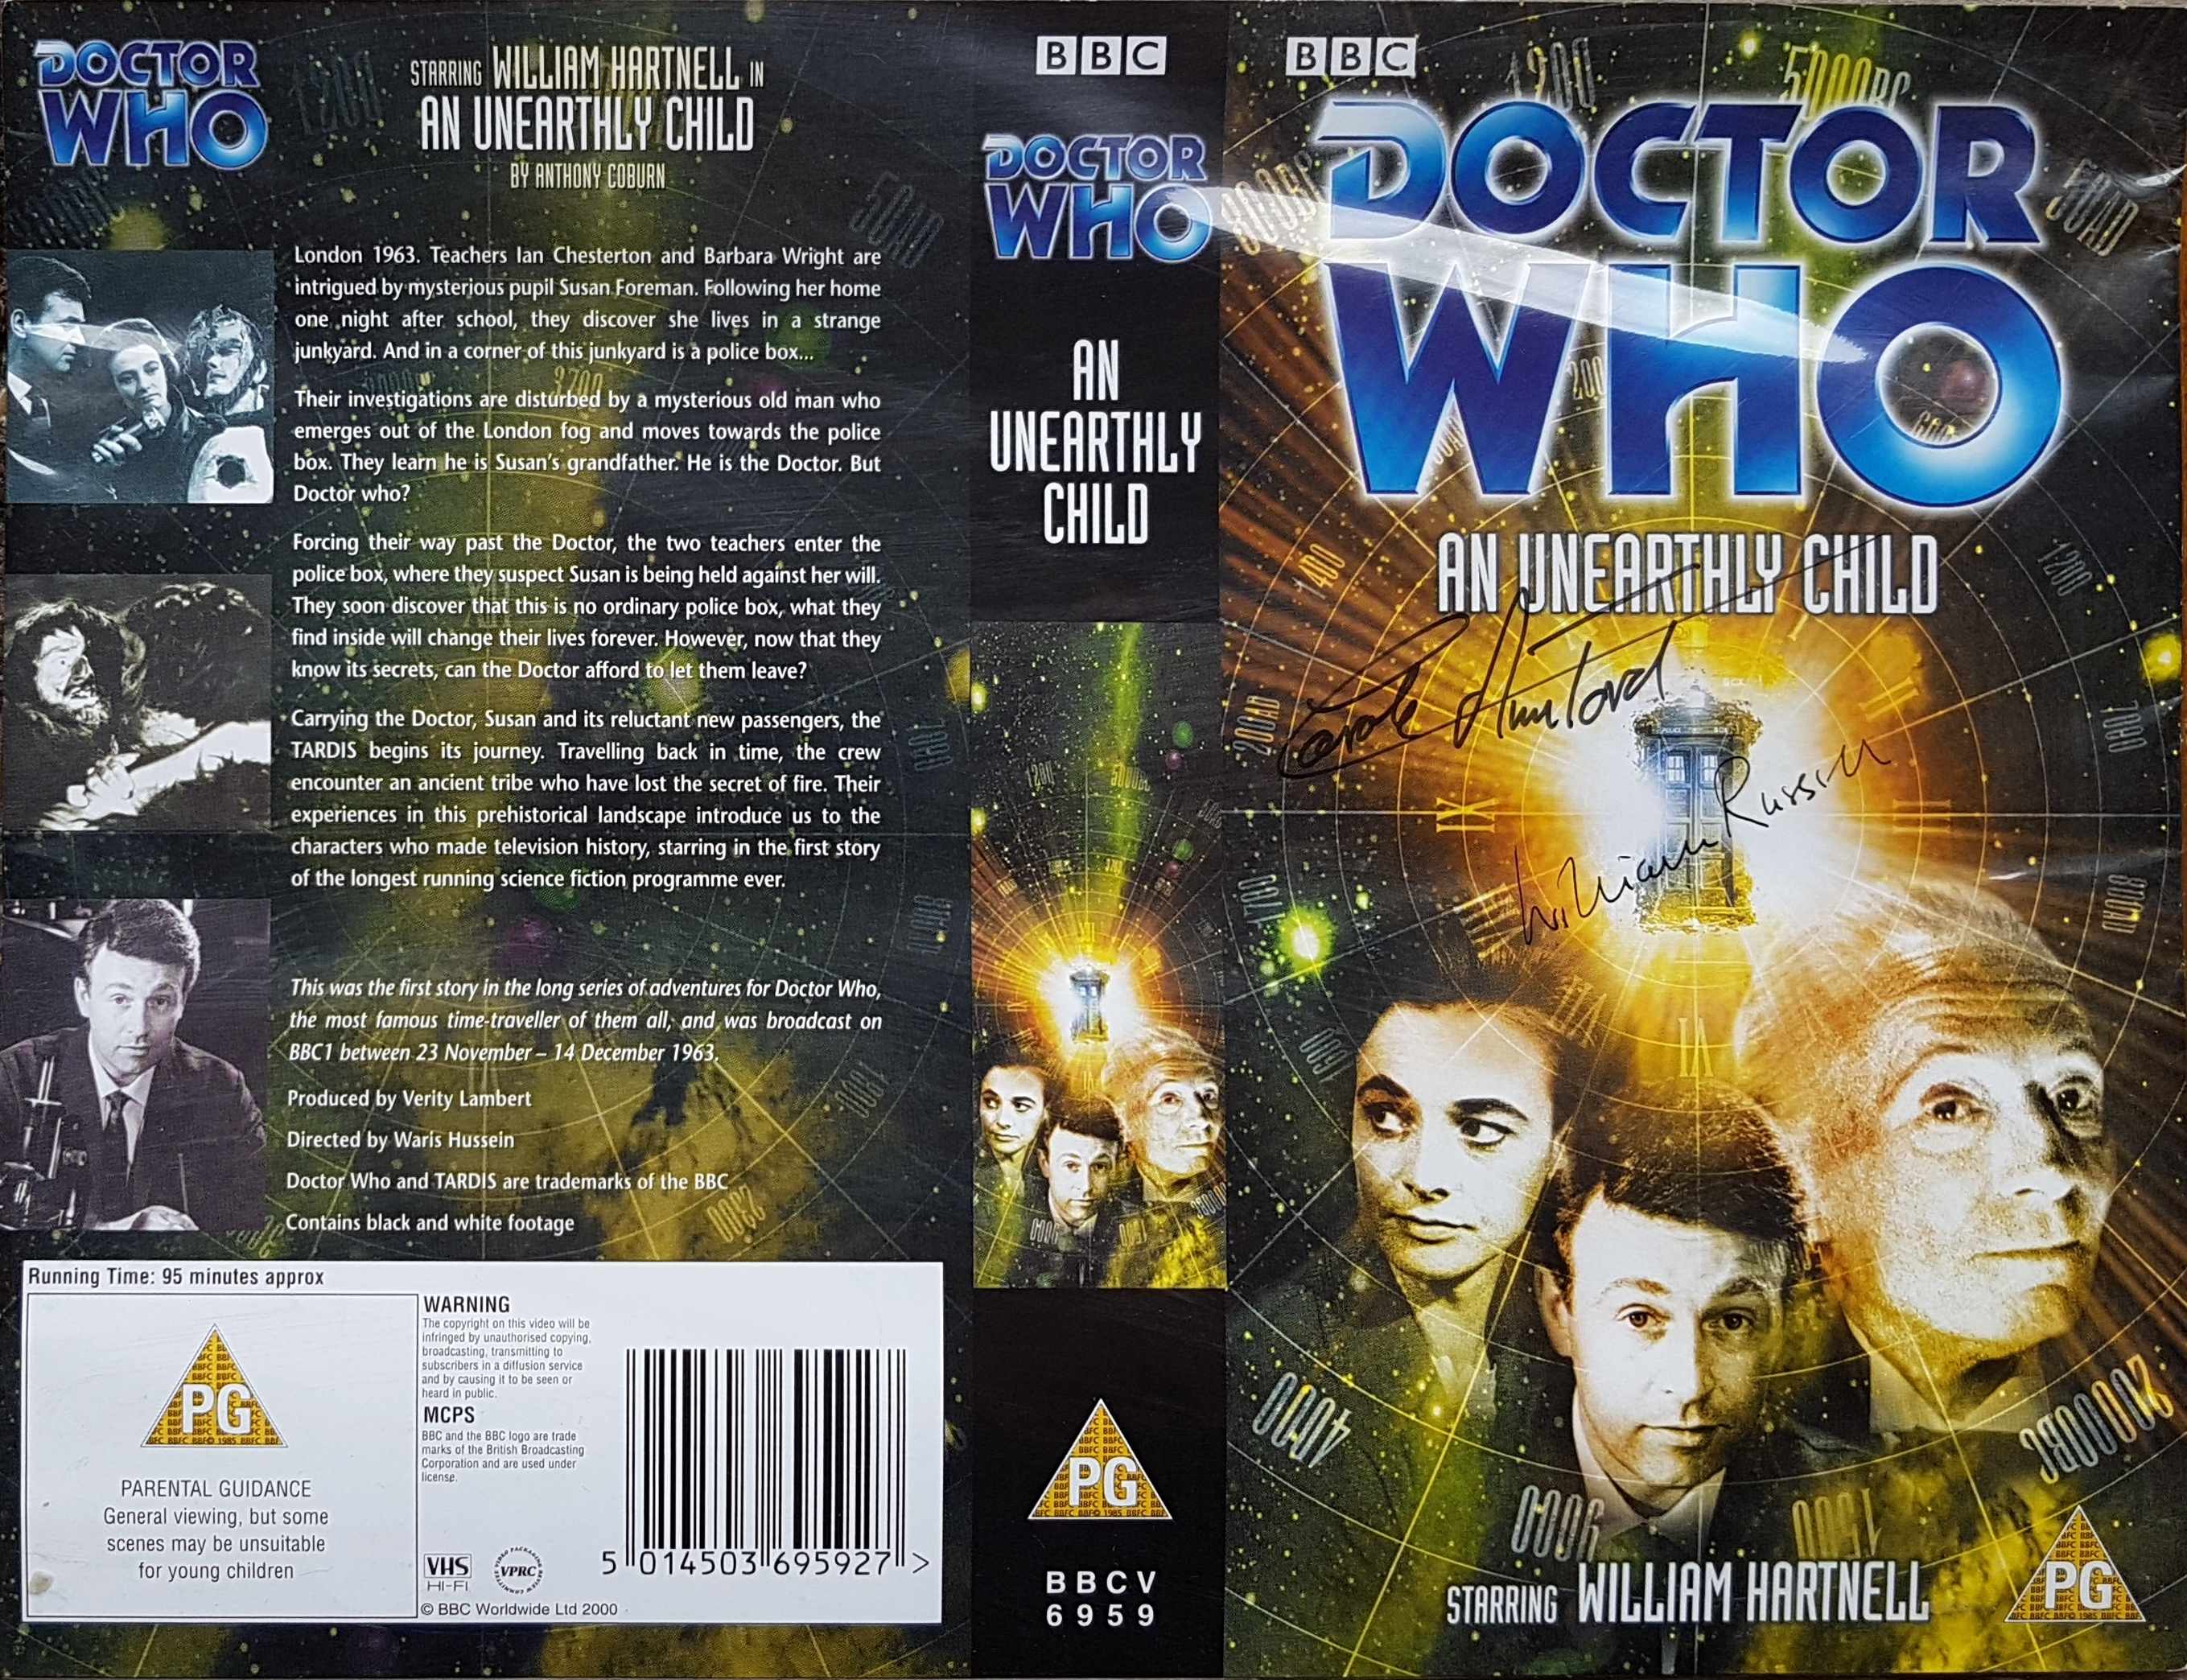 Picture of BBCV 6959 Doctor Who - An unearthly child (Autographed) video by artist Unknown from the BBC records and Tapes library